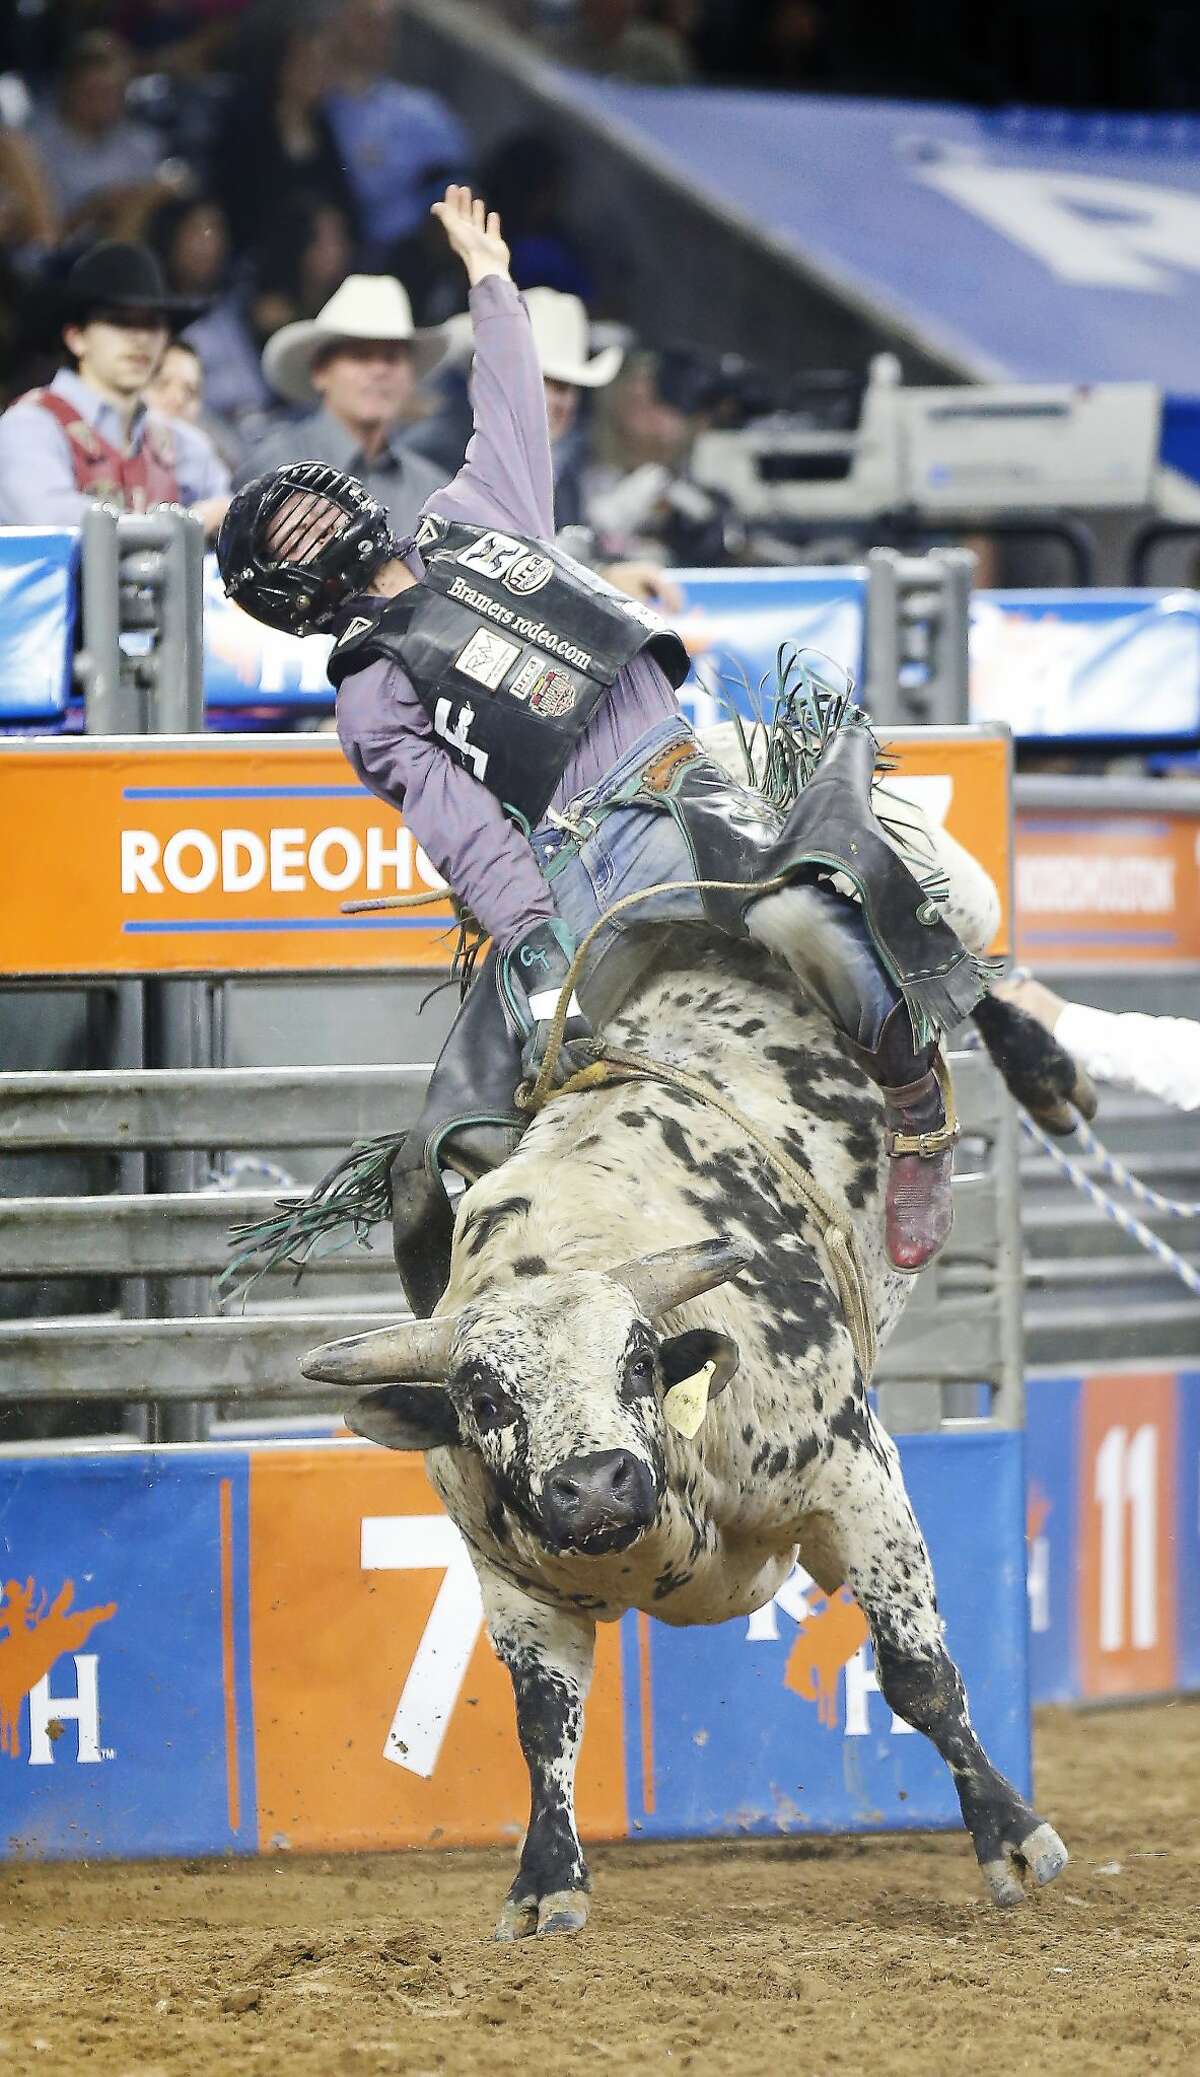 Garrett Tribble rides Indian Outlaw during Super Series II Round 3 Bull Riding action at Rodeo Houston Sunday, March 4, 2018, in Houston. ( Steve Gonzales / Houston Chronicle )